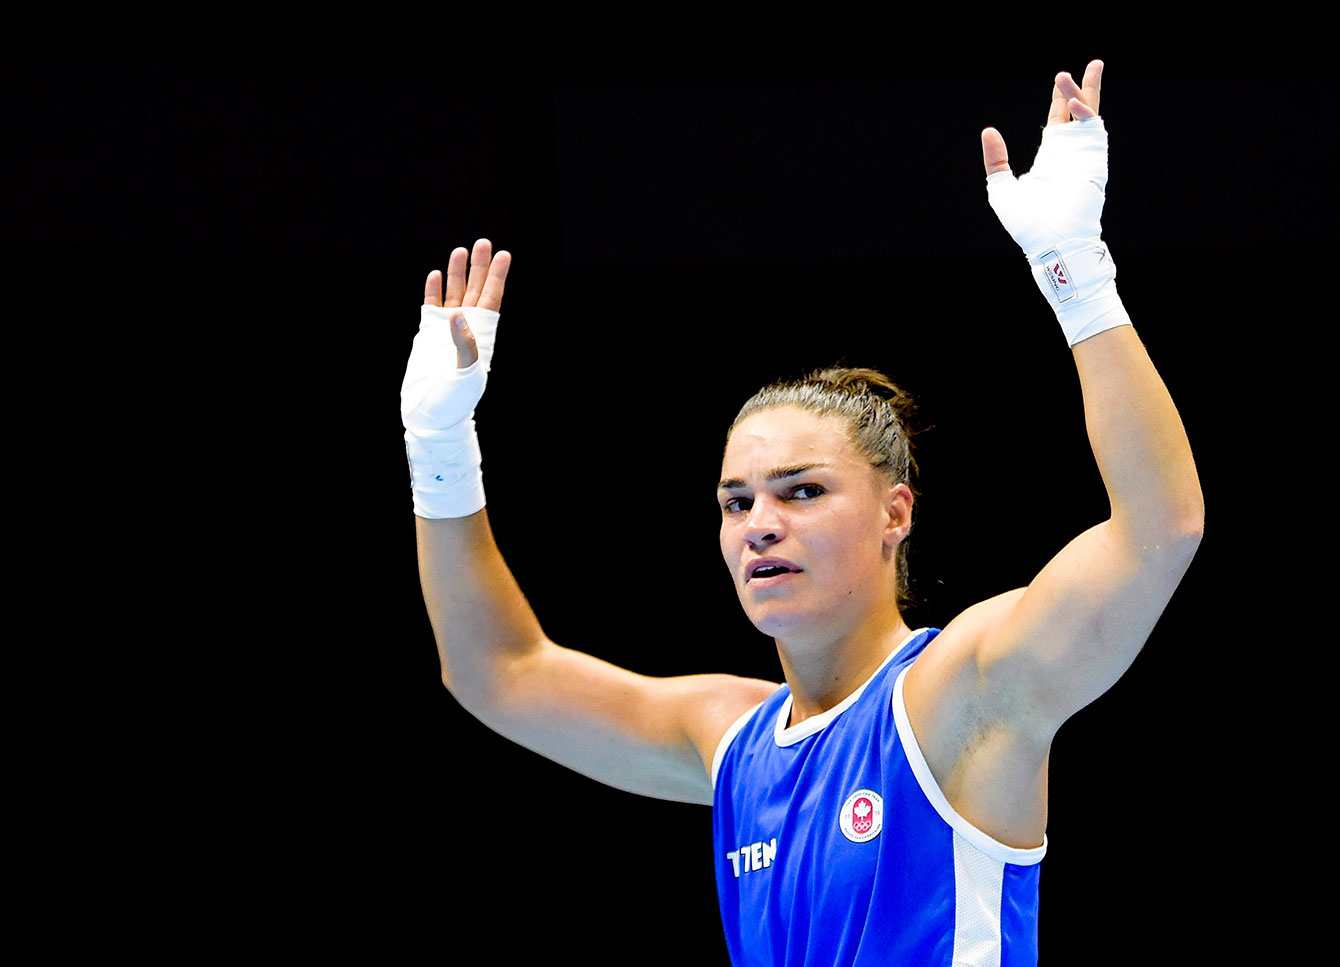 Caroline Veyre reacts after defeating Dayana Sanchez of Argentina in the women's 57-60kg lightweight gold medal boxing final during the Pan American Games.